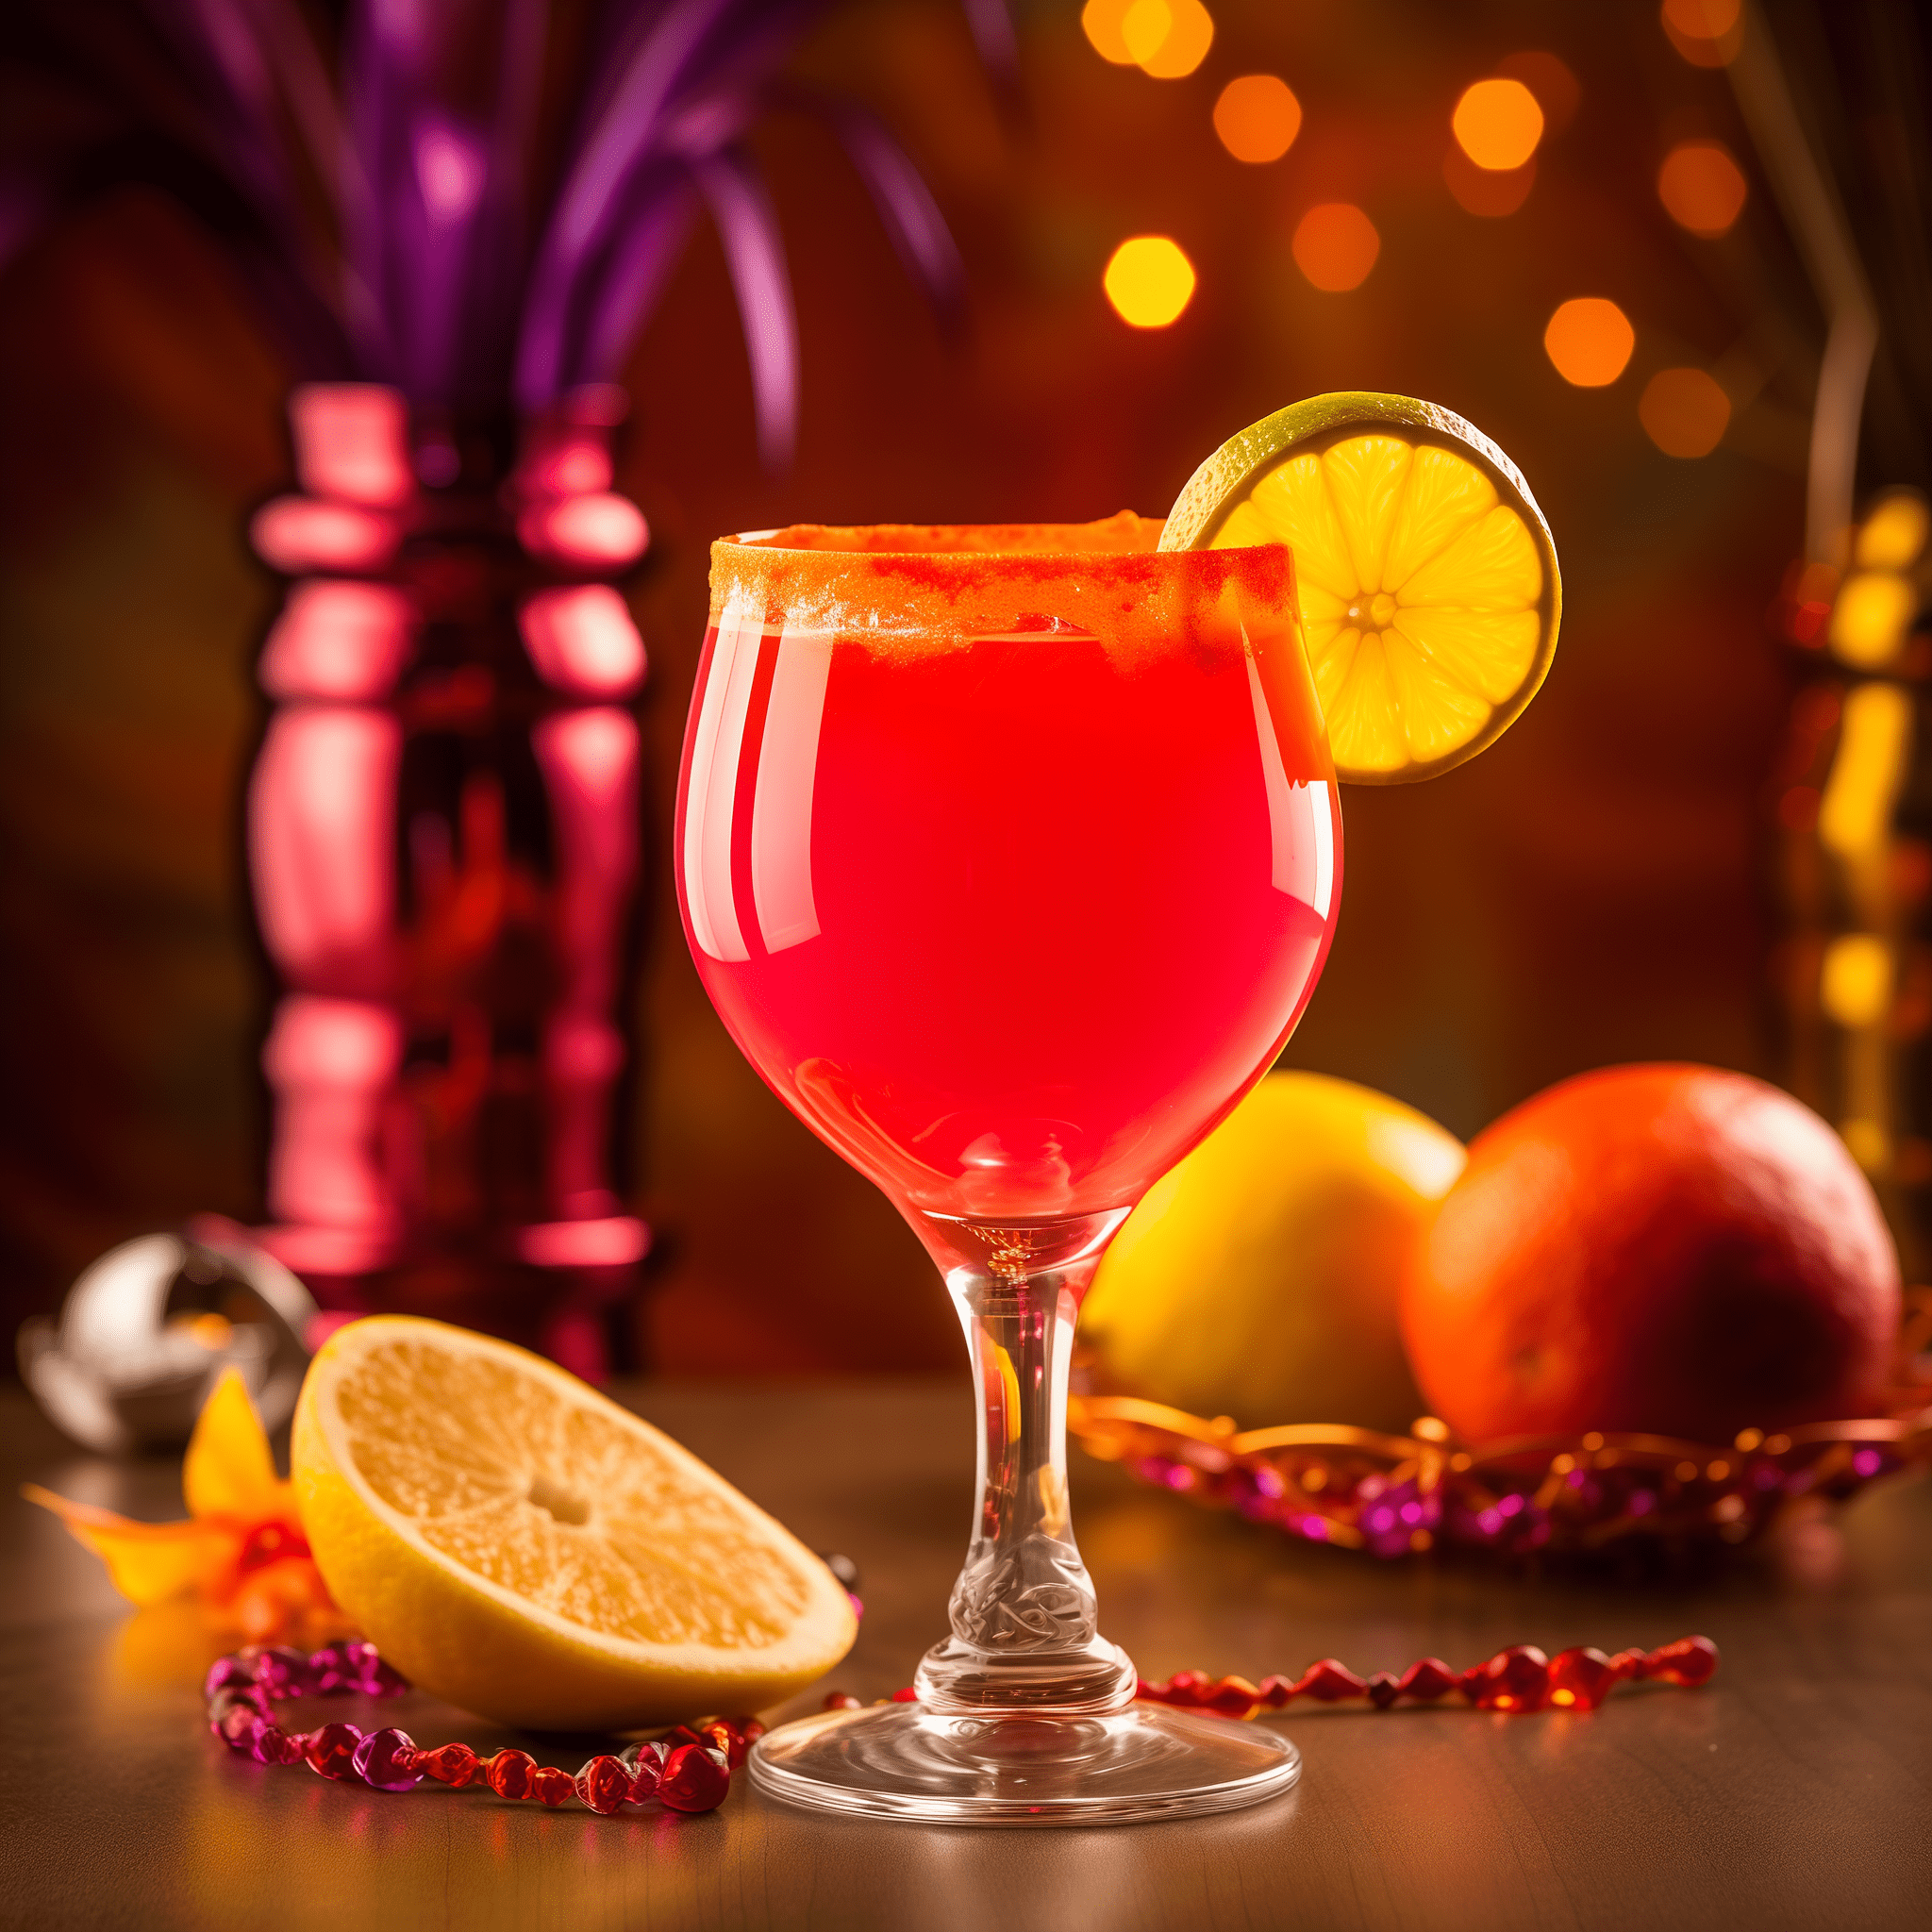 Open House Punch Cocktail Recipe - The Open House Punch is a delightful blend of sweet and citrus flavors with a smooth, fruity undertone. It's refreshing, slightly tangy, and not overly strong, making it a crowd-pleaser.